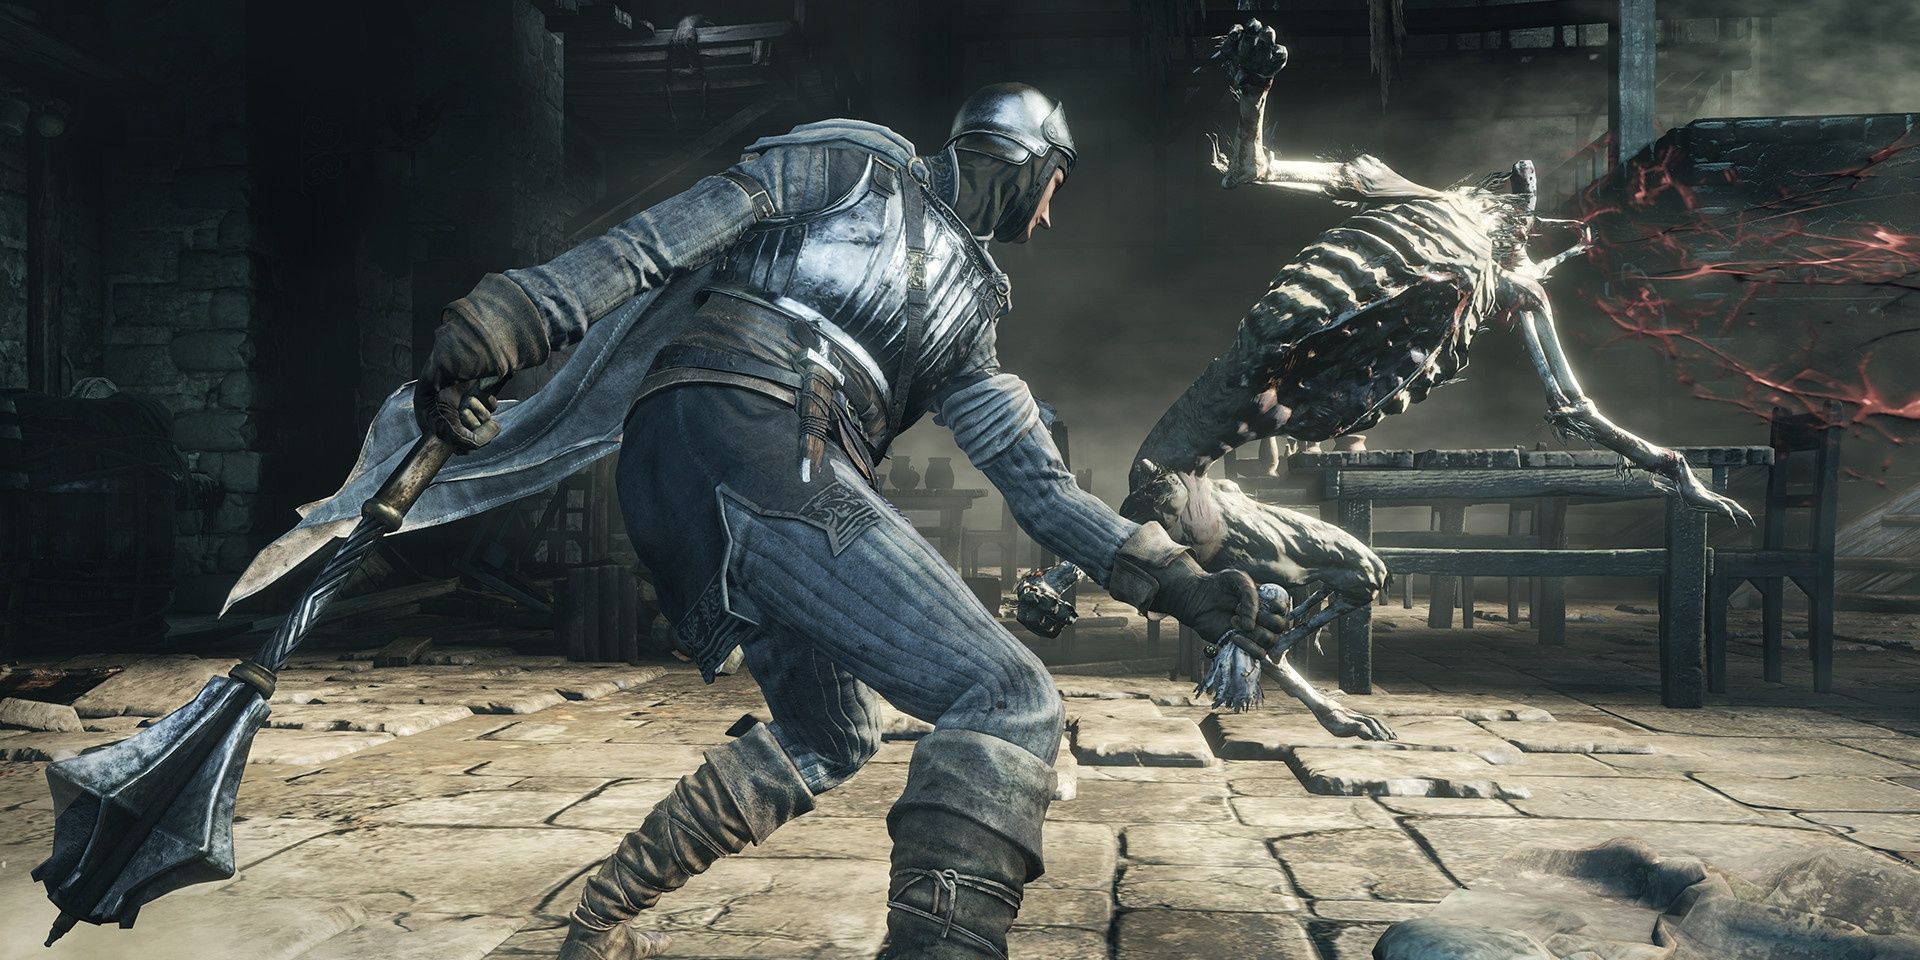 A combat sequence where the player knocks out a bony enemy in Dark Souls 3